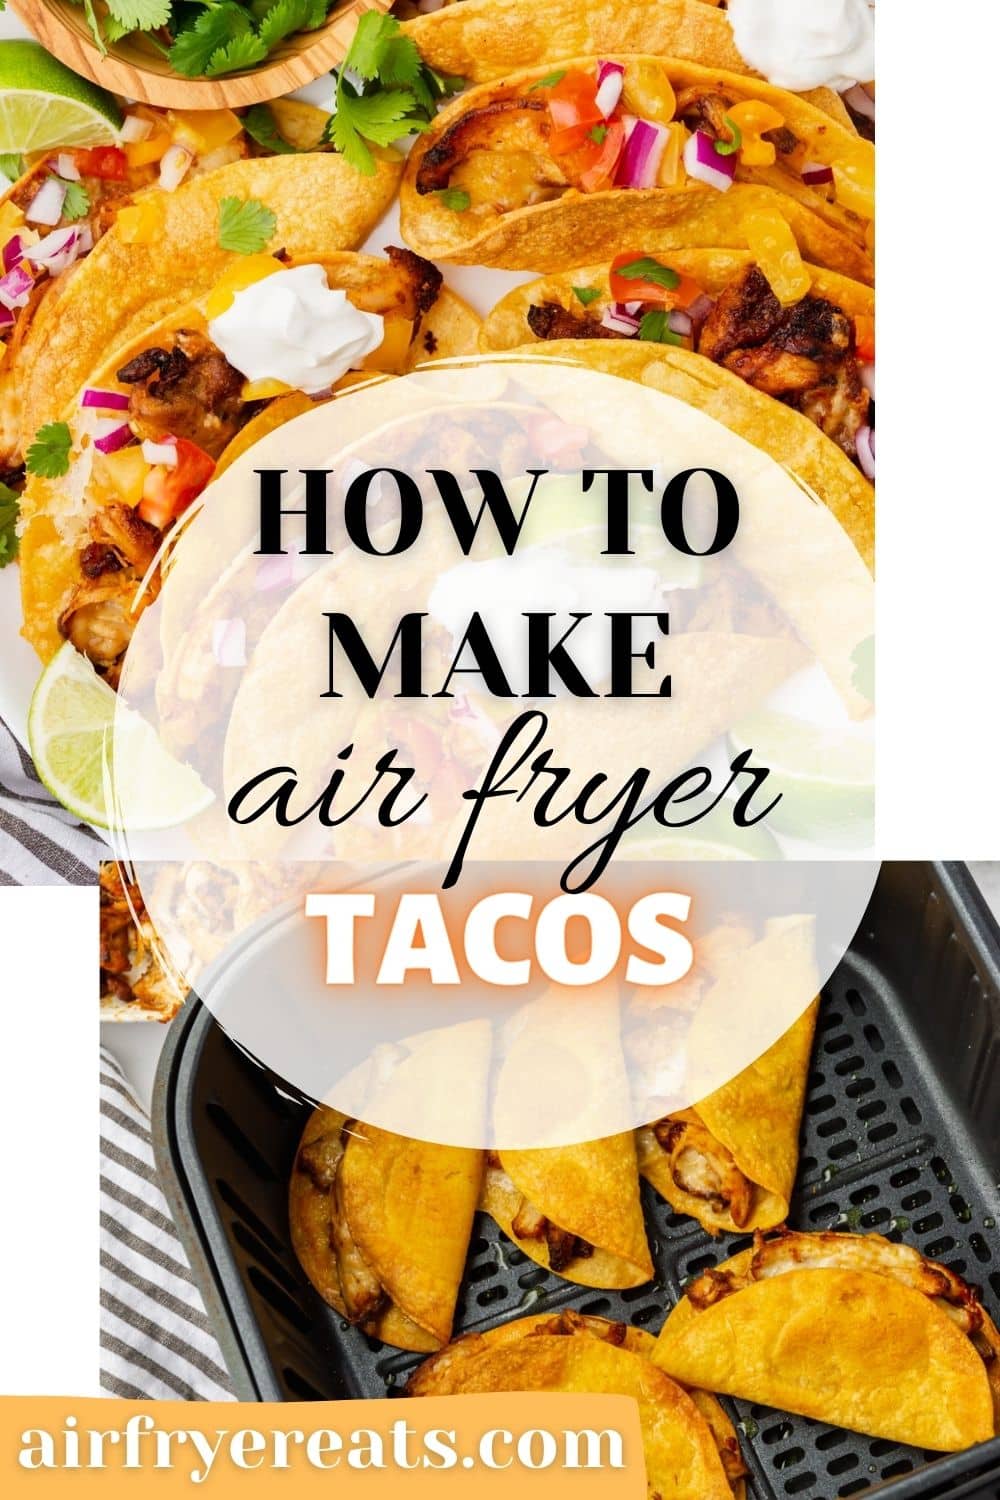 two photos of air fryer tacos. Text overlay in a circle in the center says "how to make air fryer tacos" in varied fonts